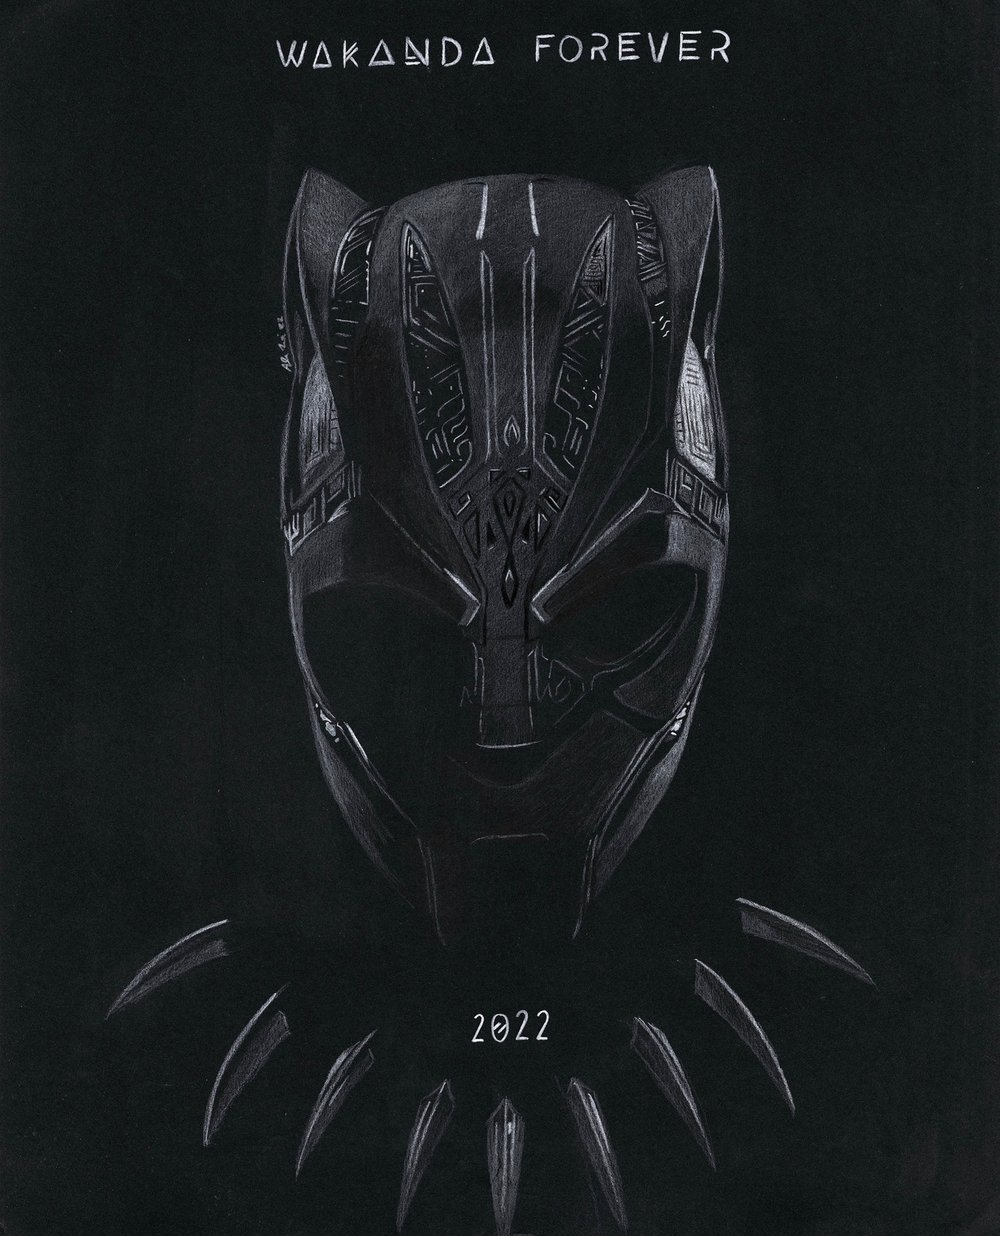 Image of “Death is not the end.” BLACK PANTHER: WAKANDA FOREVER Art Print